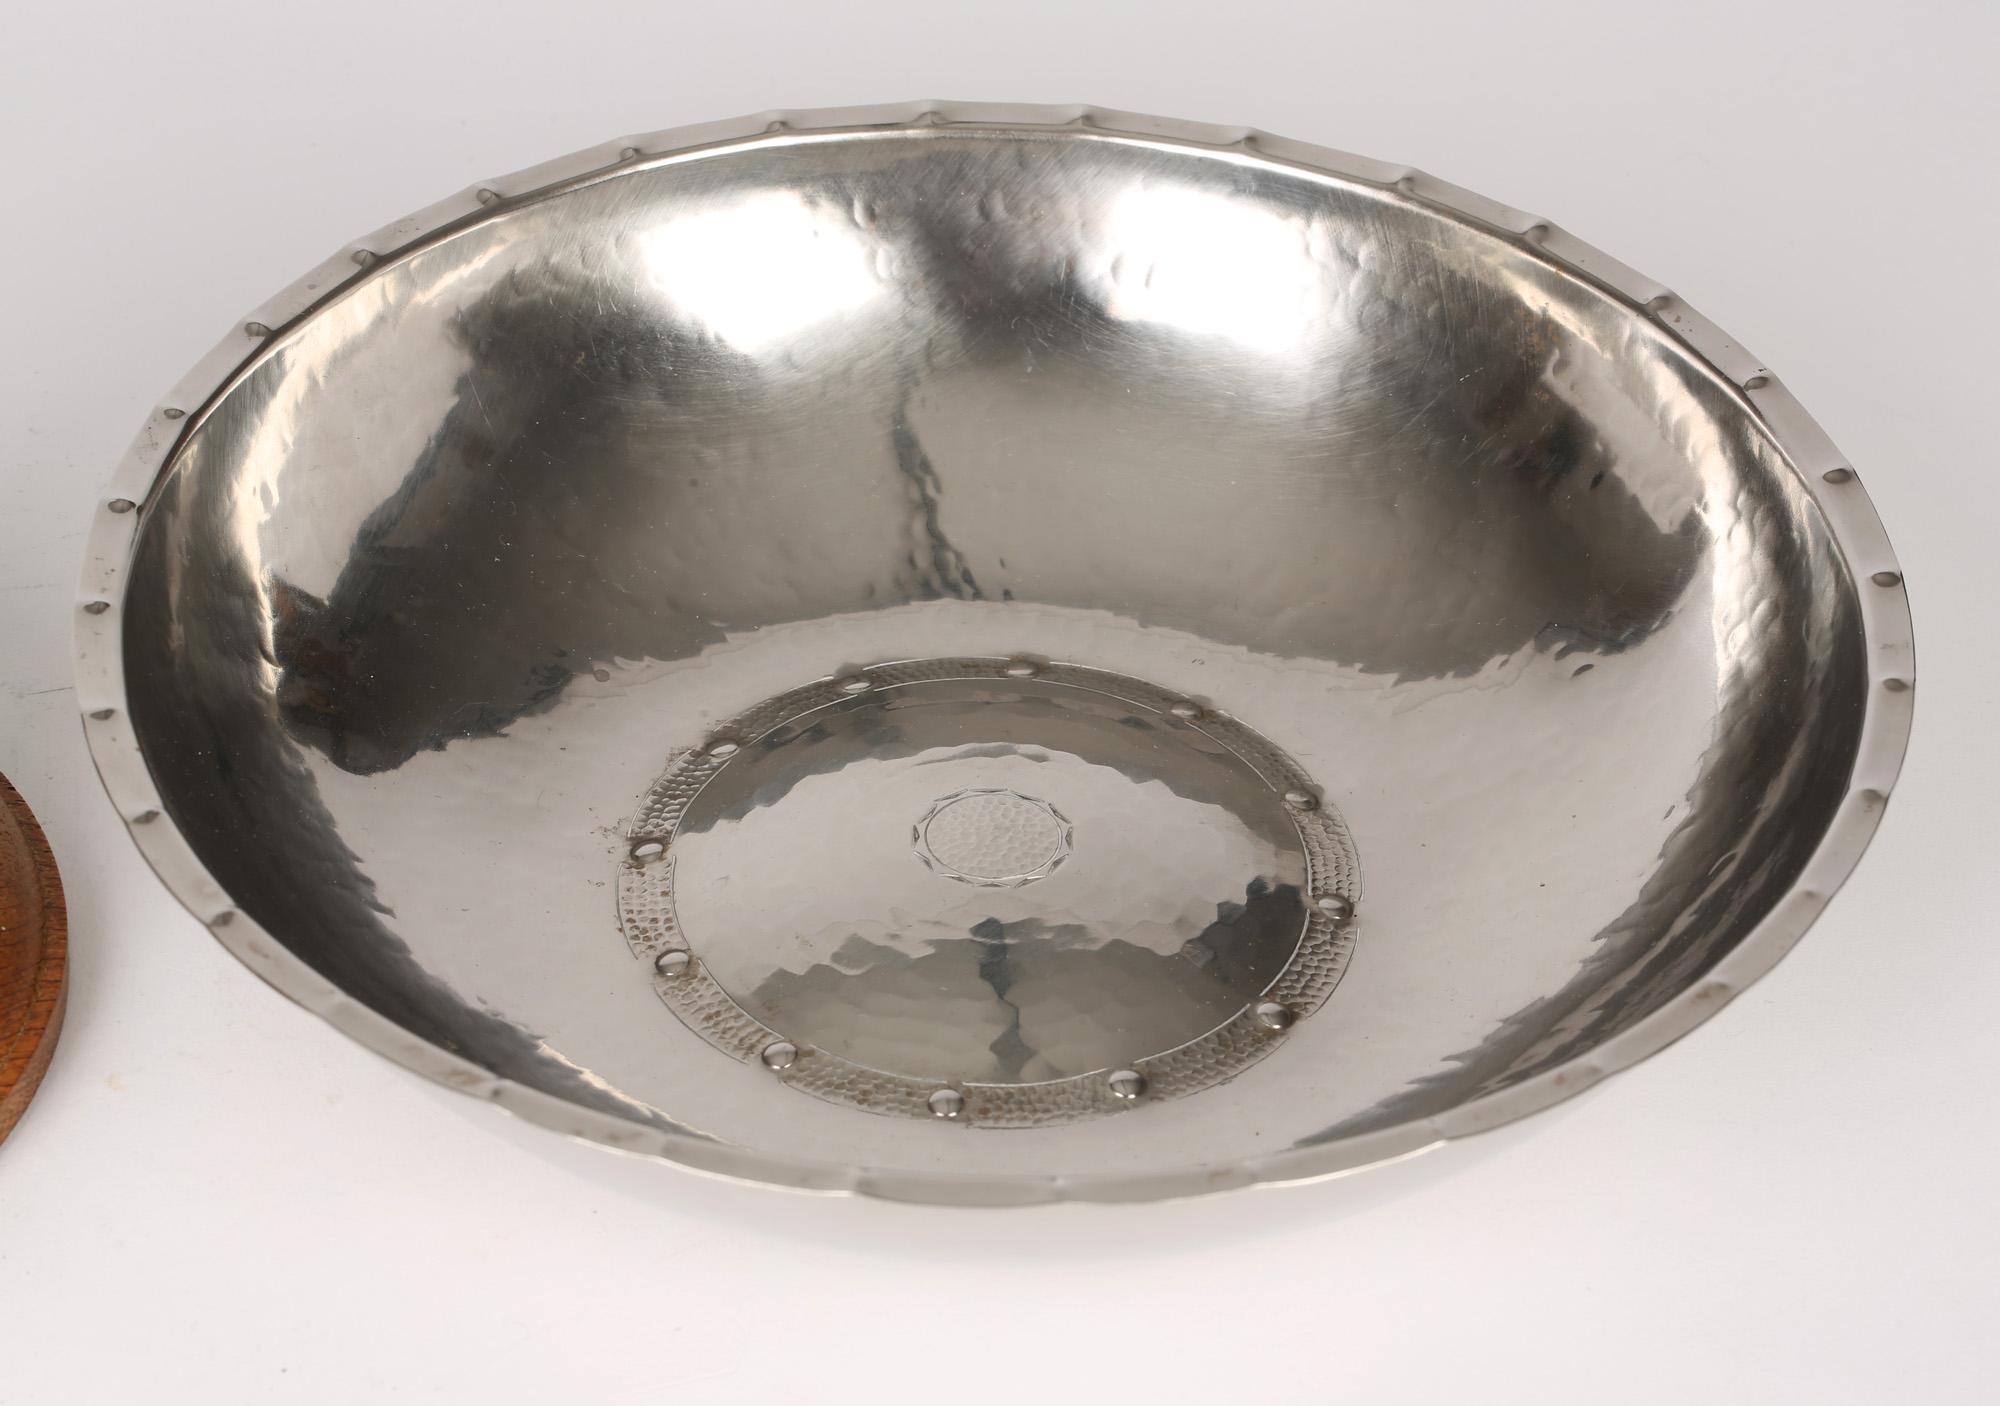 A very stylish, rare unique mid-century English hand beaten 'Staybright' presentation bowl on stand designed by Stanley Watson for Lakeland Rural Industries around 1955. The bowl of wide rounded shape is hand beaten and formed from a single metal